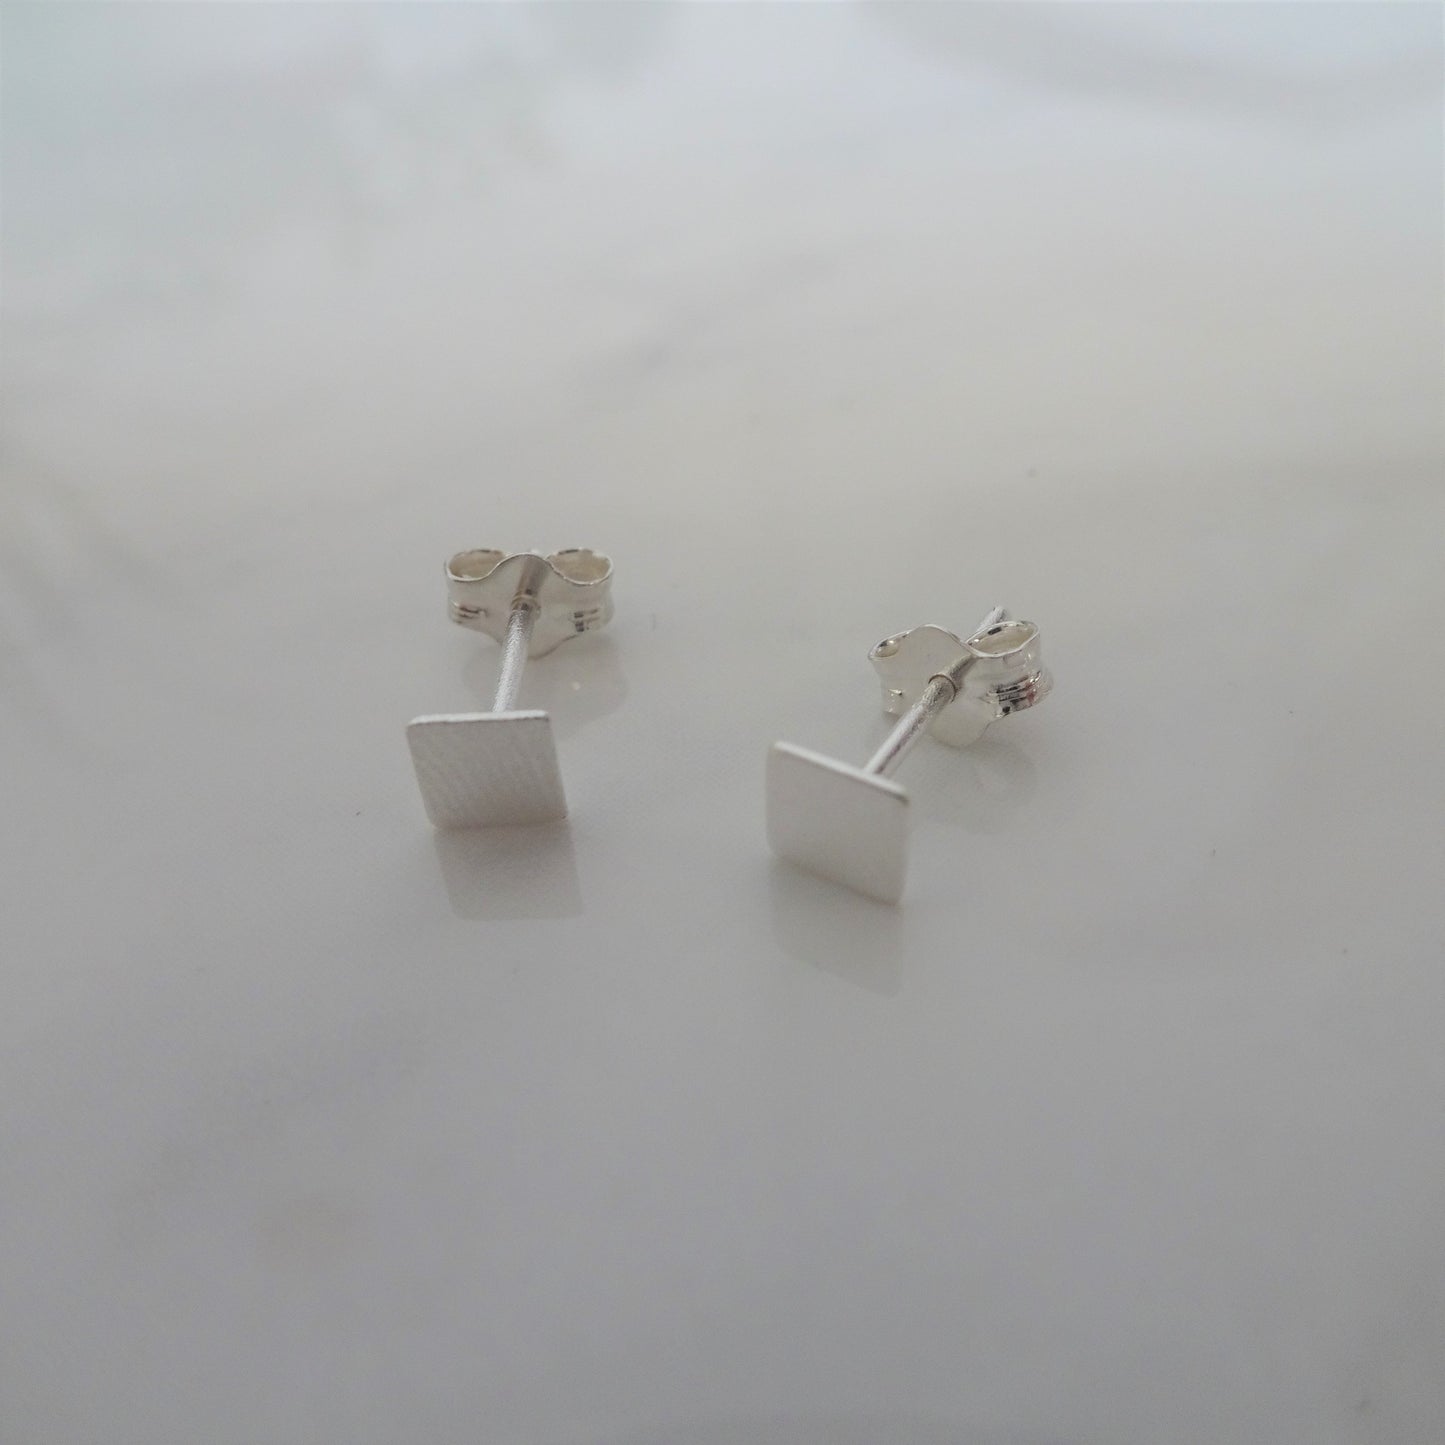 Small Sterling Silver 4mm Square Stud Earrings